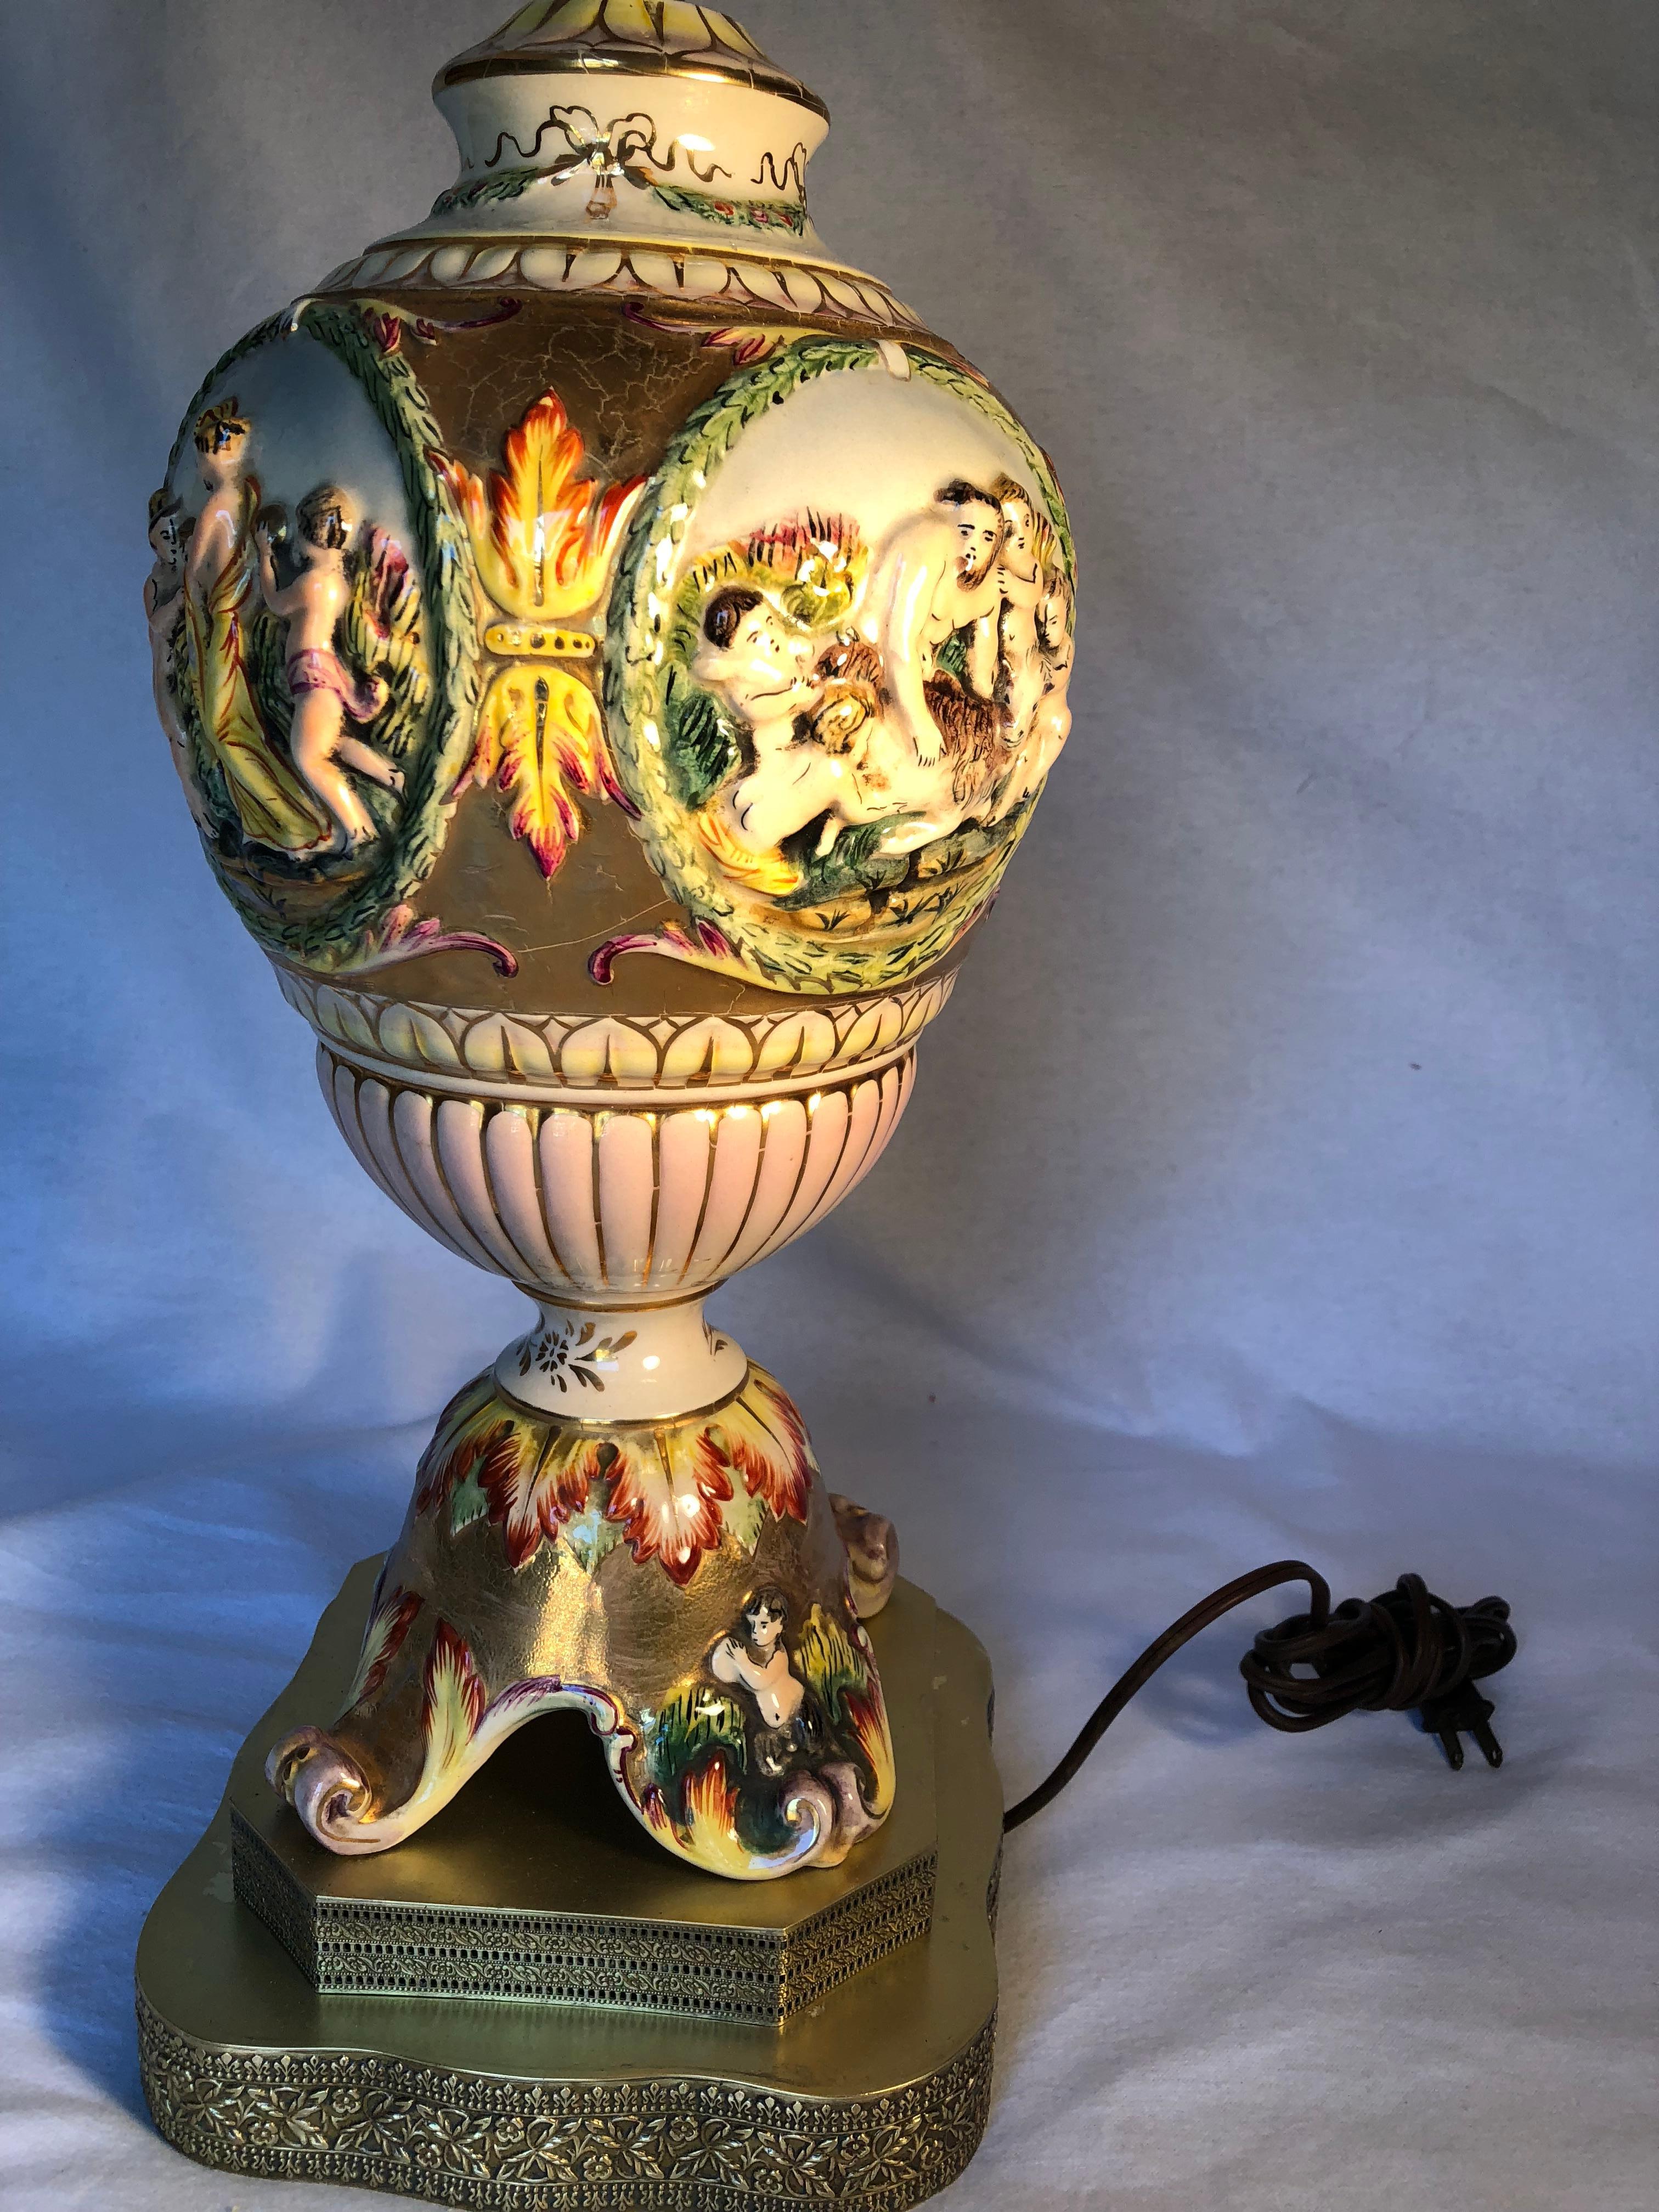 Beautiful 19th century Capodimonte lamp. I think the shade is a replacement. It is beautifully hand-painted and gold gilded with an intricate solid brass base and finial.